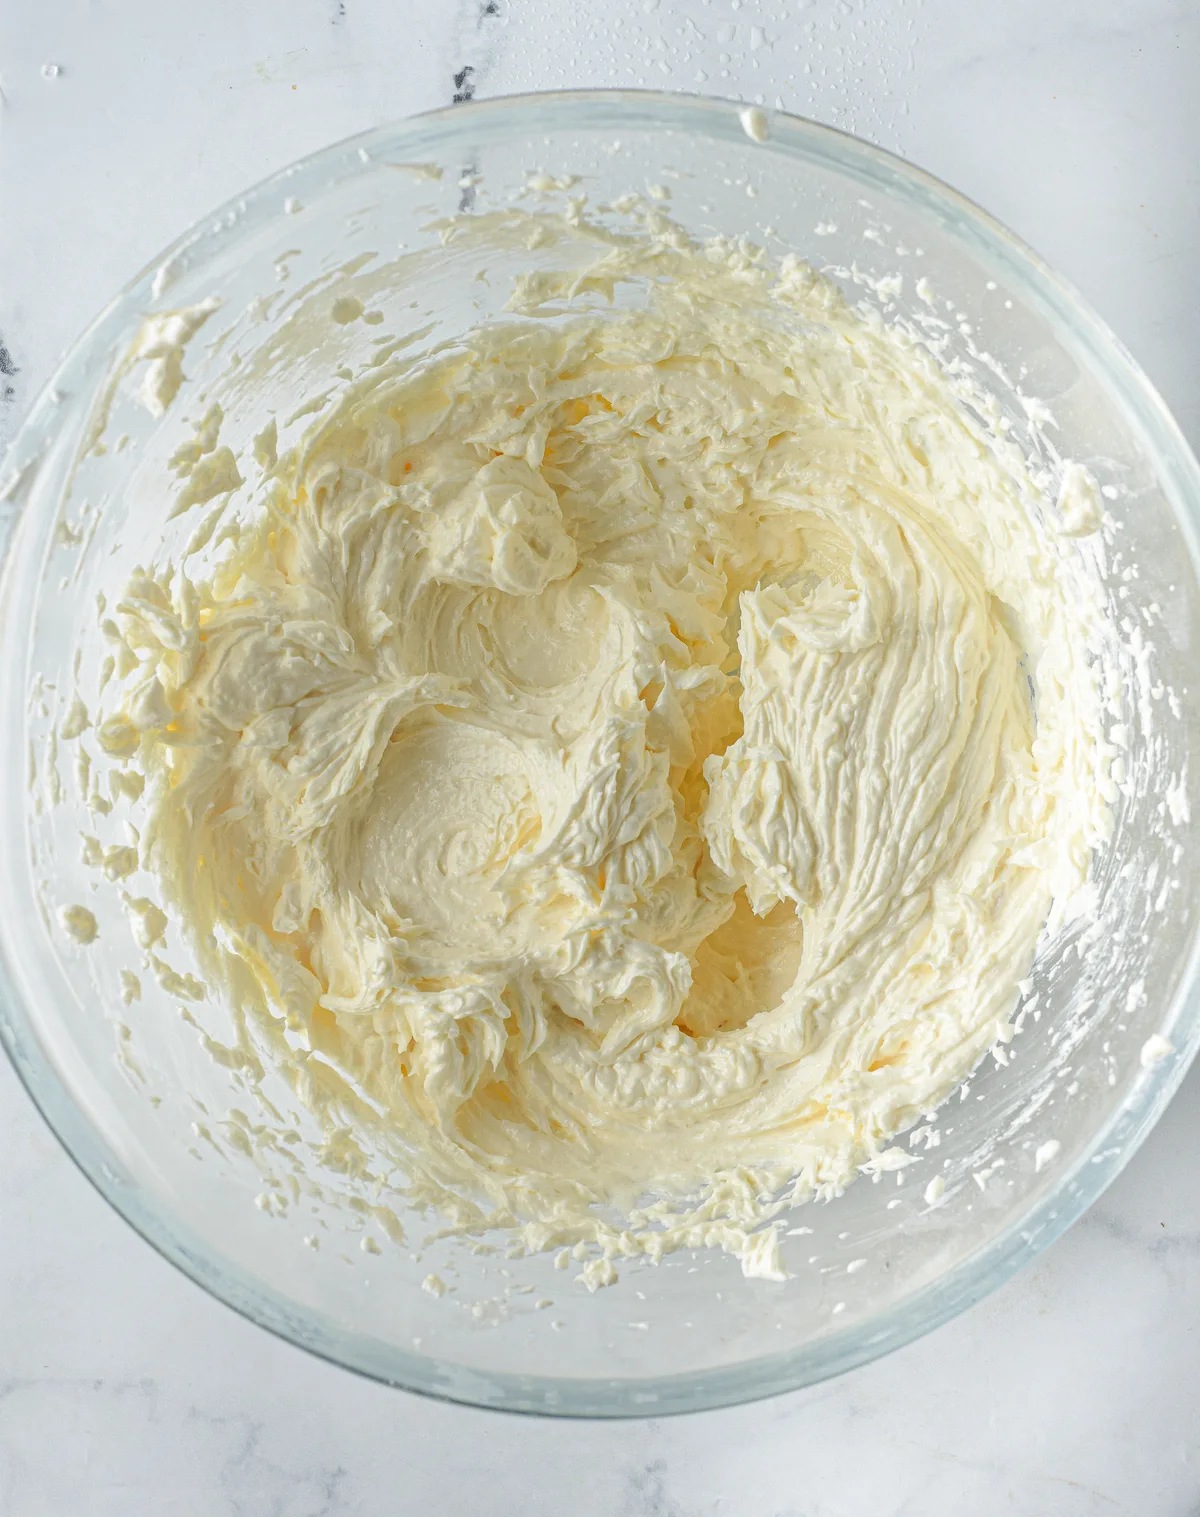 Butter beat with a hand mixer in a glass bowl until creamy